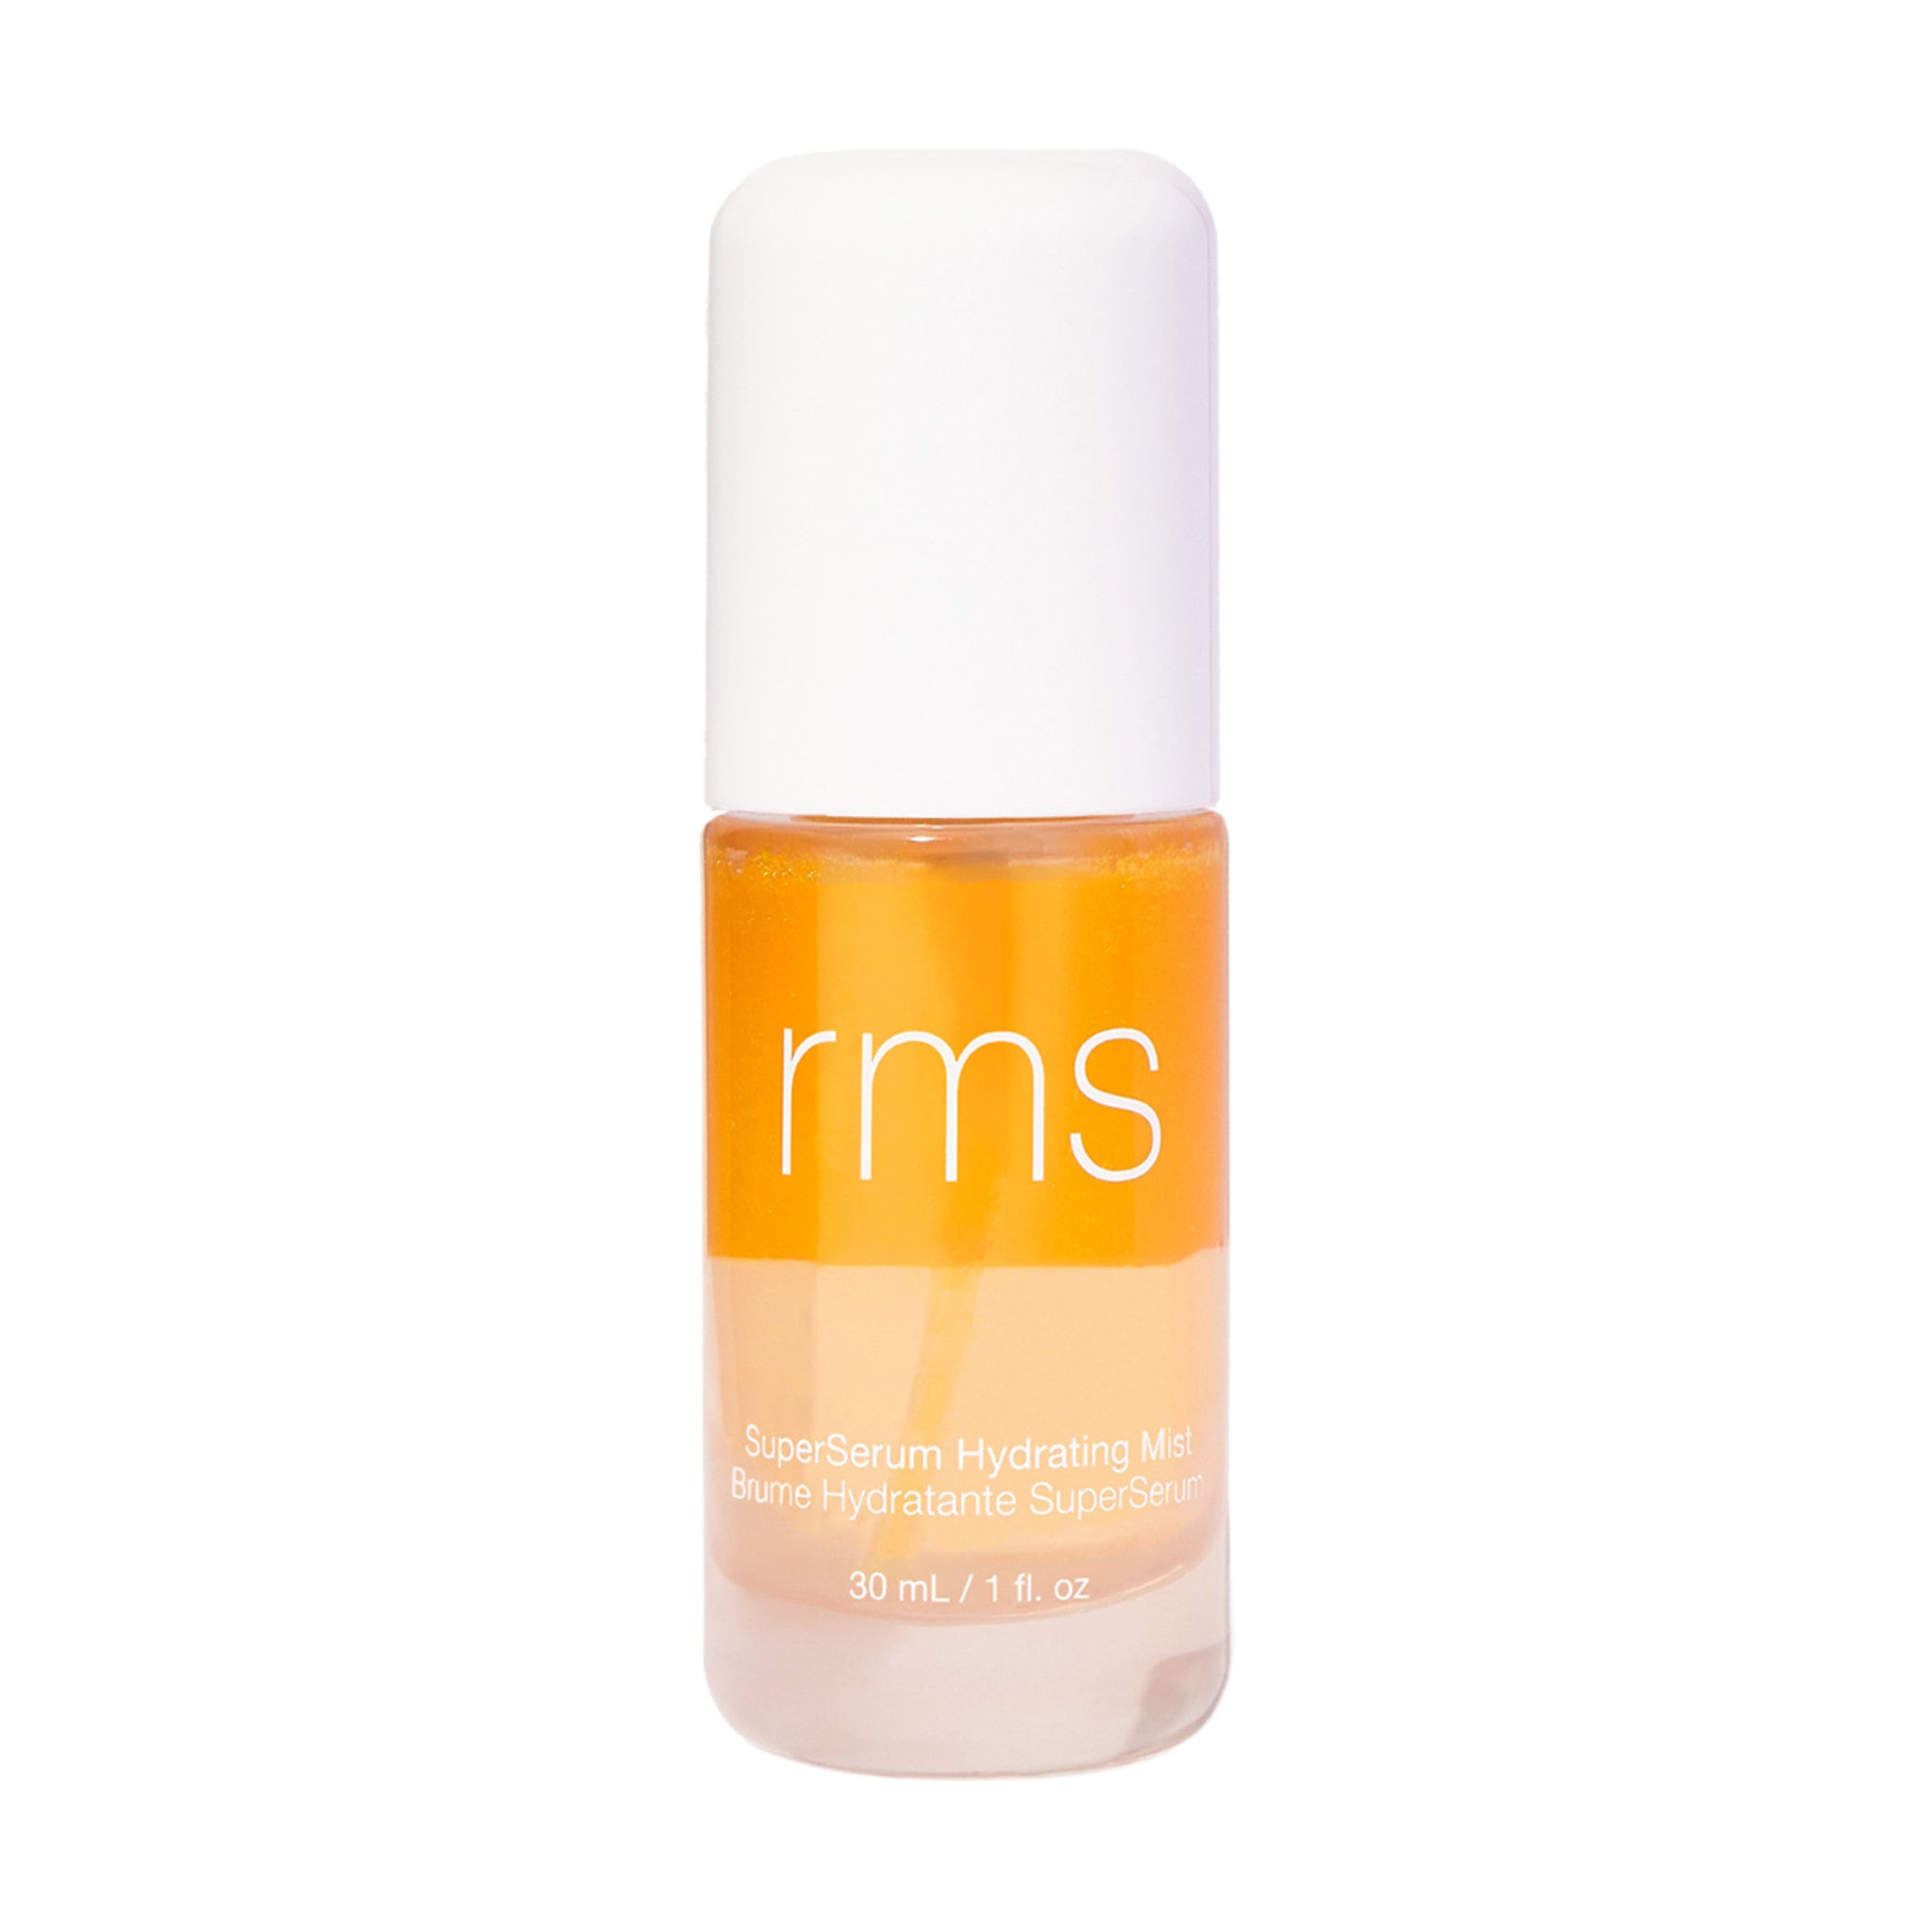 RMS Beauty SuperSerum Hydrating Mist main image.